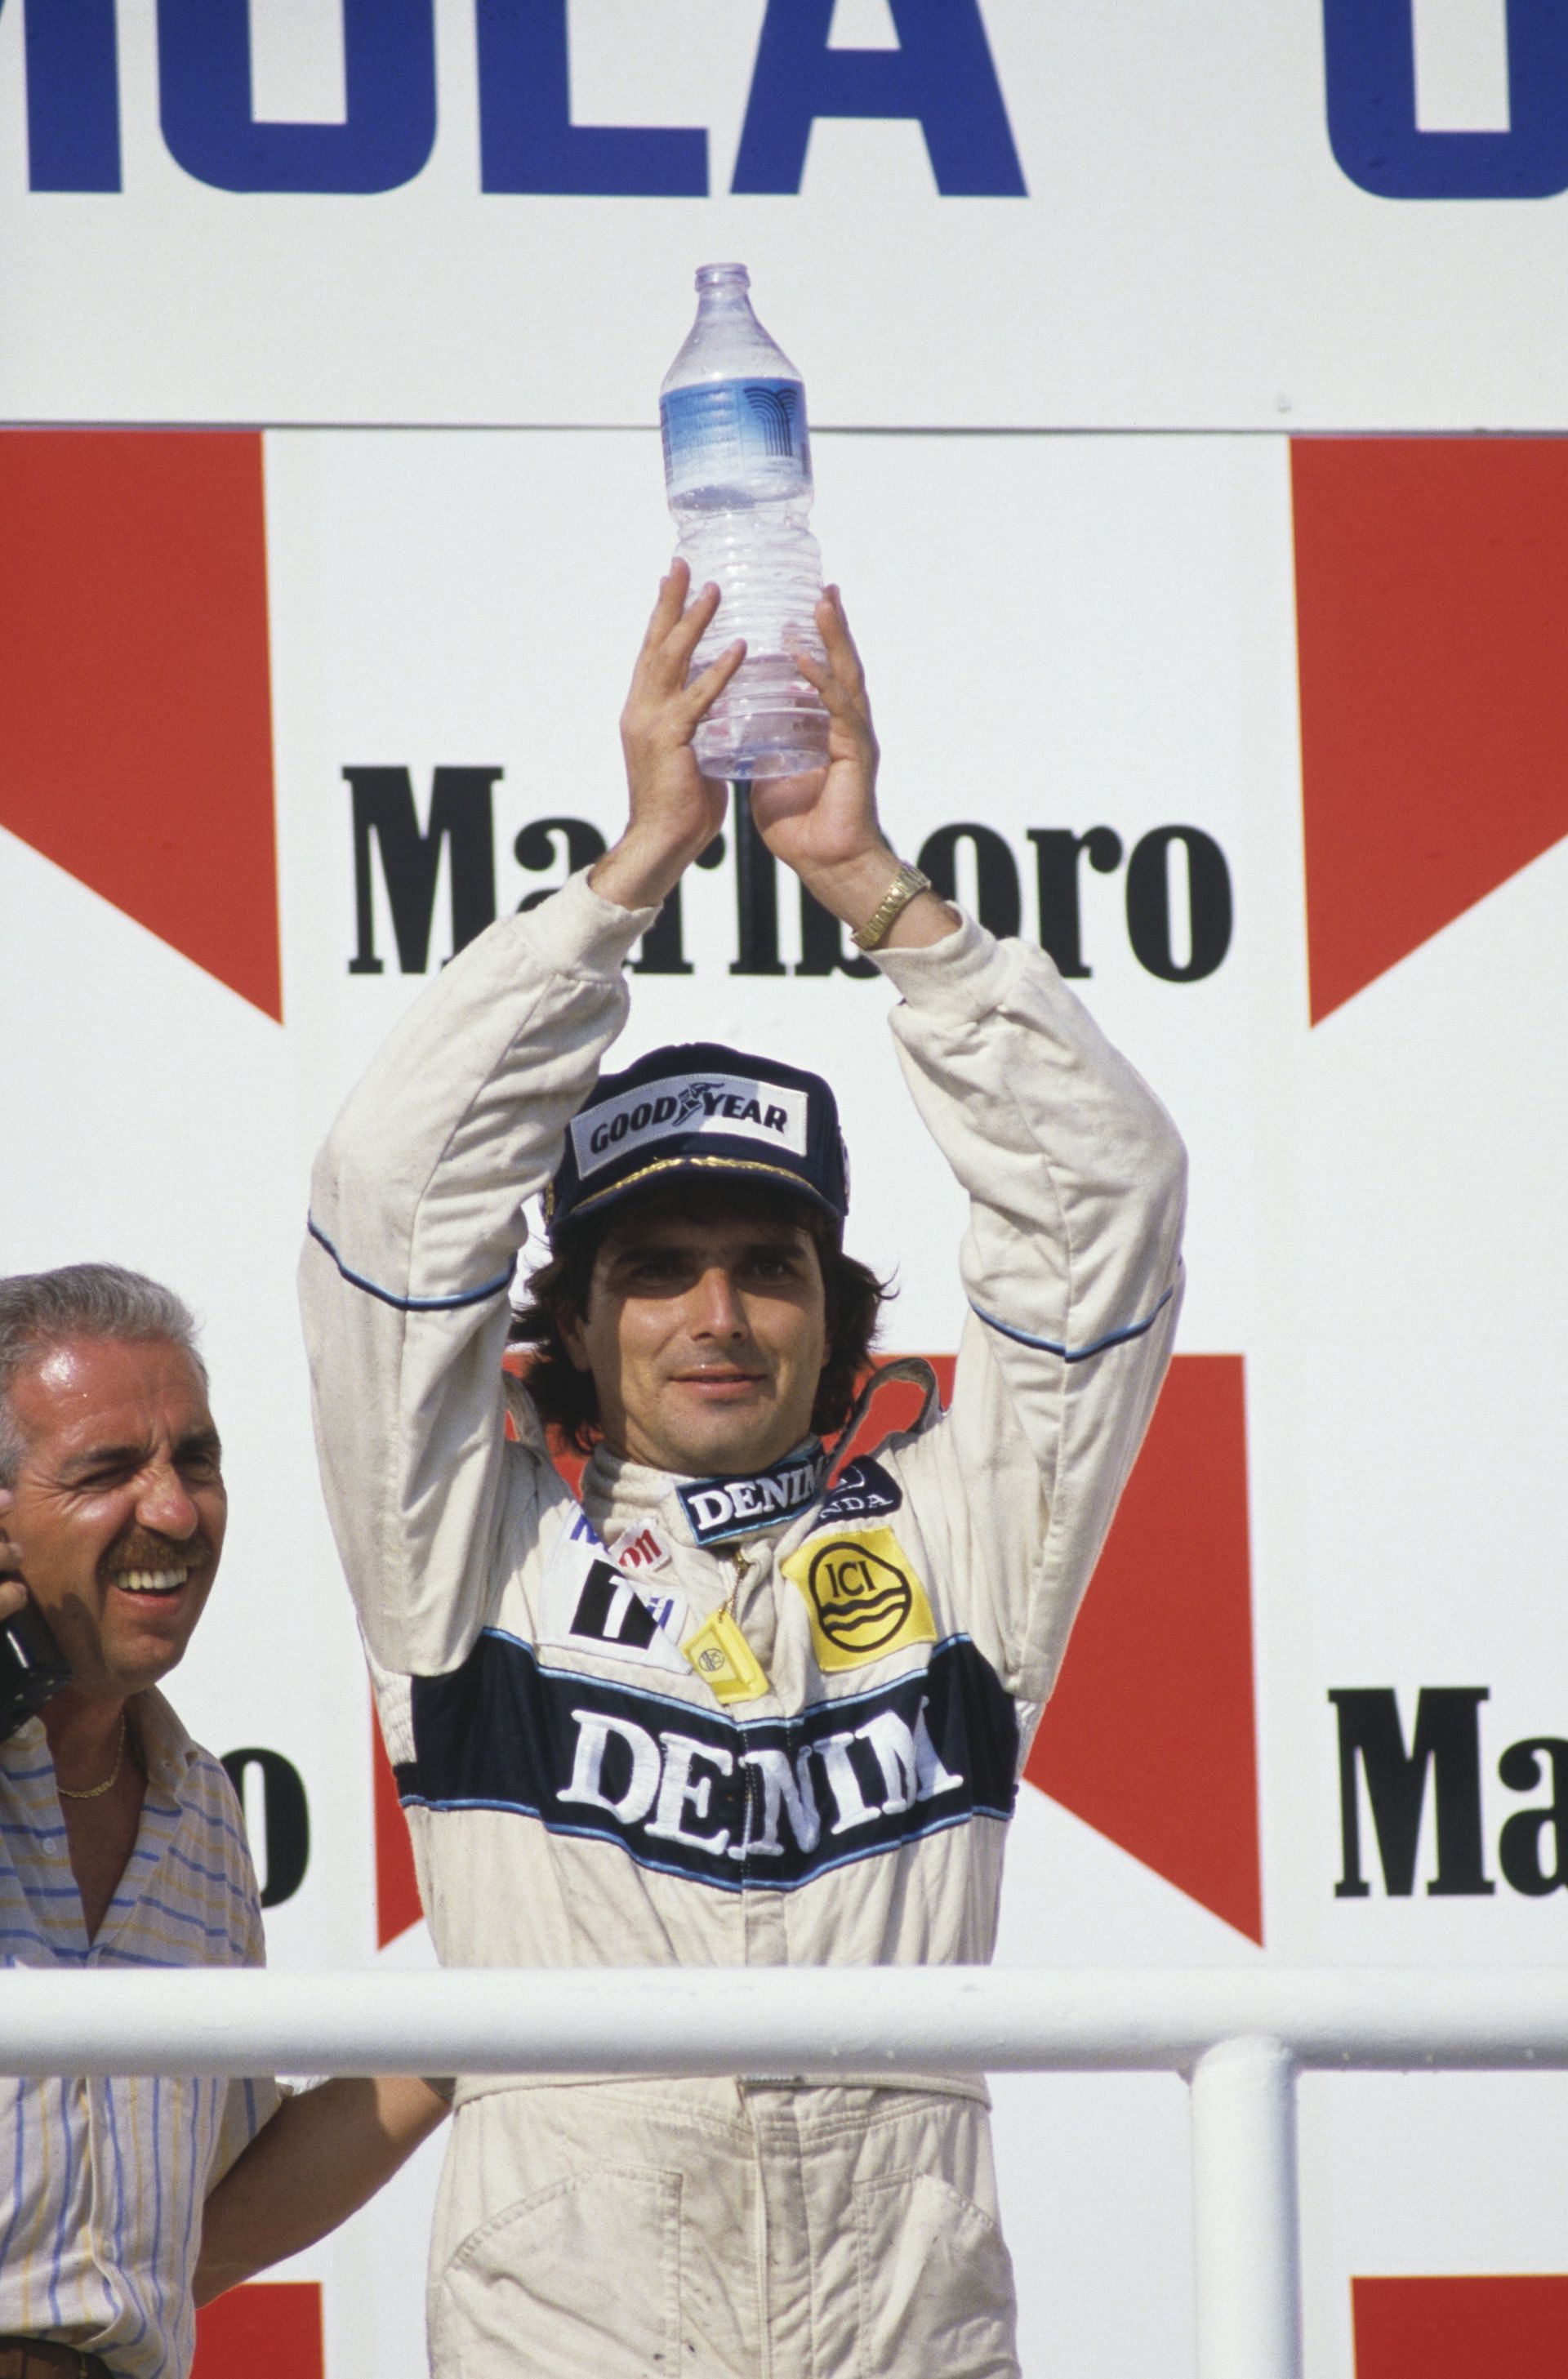 Nelson Piquet wins the Hungarian Grand Prix in 1986 (Photo by Mike King/Getty Images)